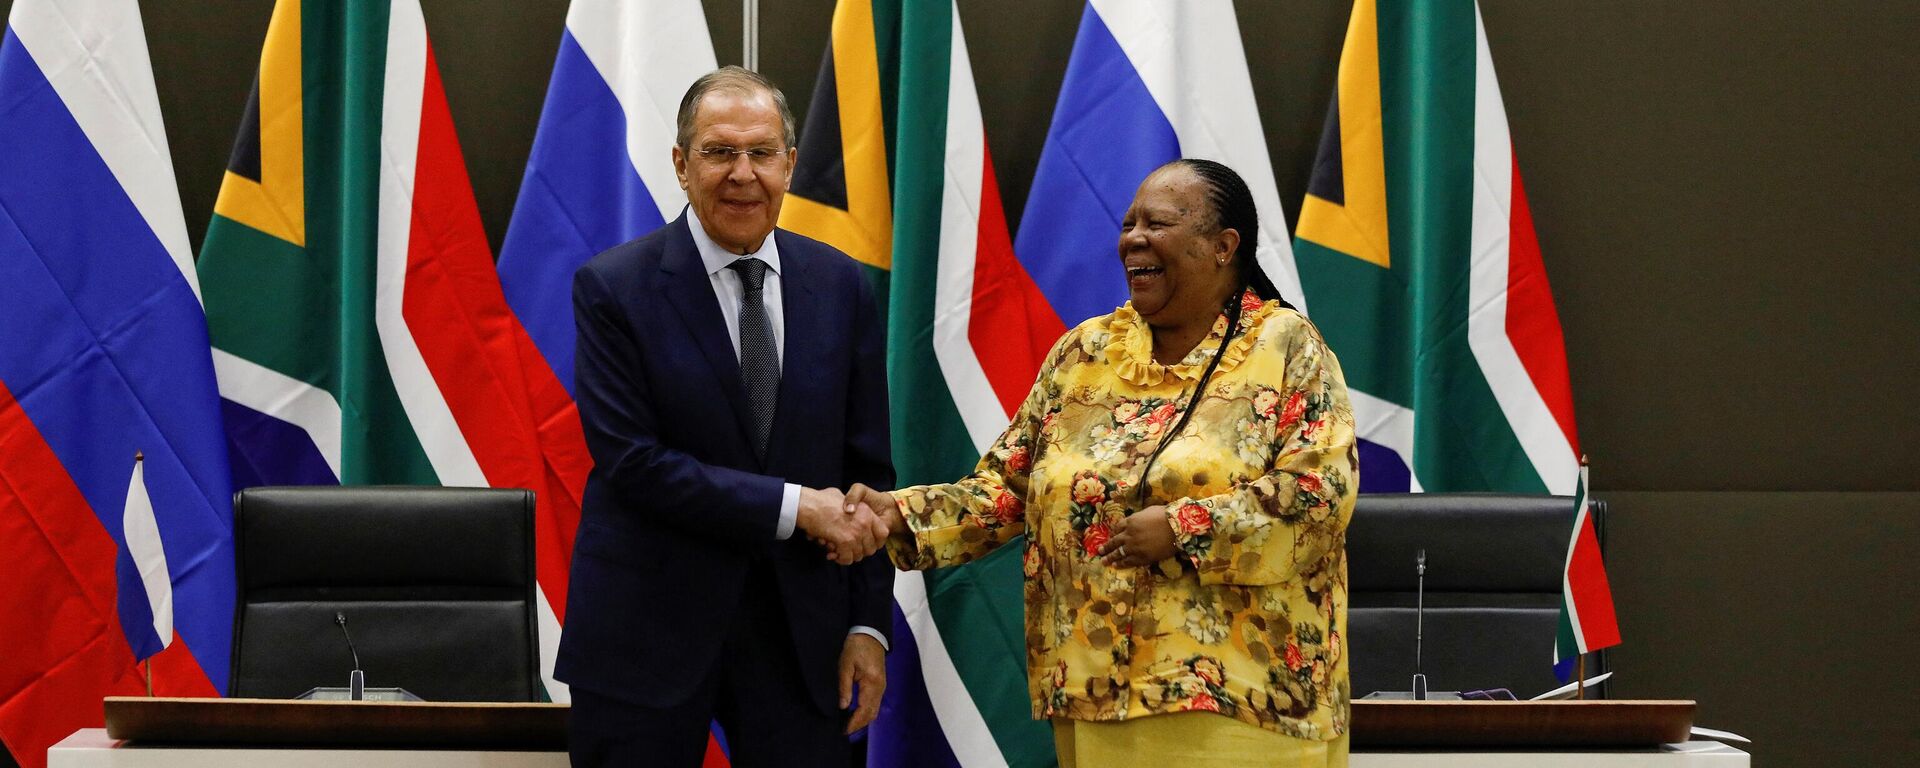 Russian Minister of Foreign Affairs of Sergei Lavrov (L) shakes hands with South African Minister of International Relations and Cooperation Naledi Pandor (R) during a press conference following their meeting at the OR Tambo Building in Pretoria on January 23, 2023.  - Sputnik International, 1920, 30.03.2023